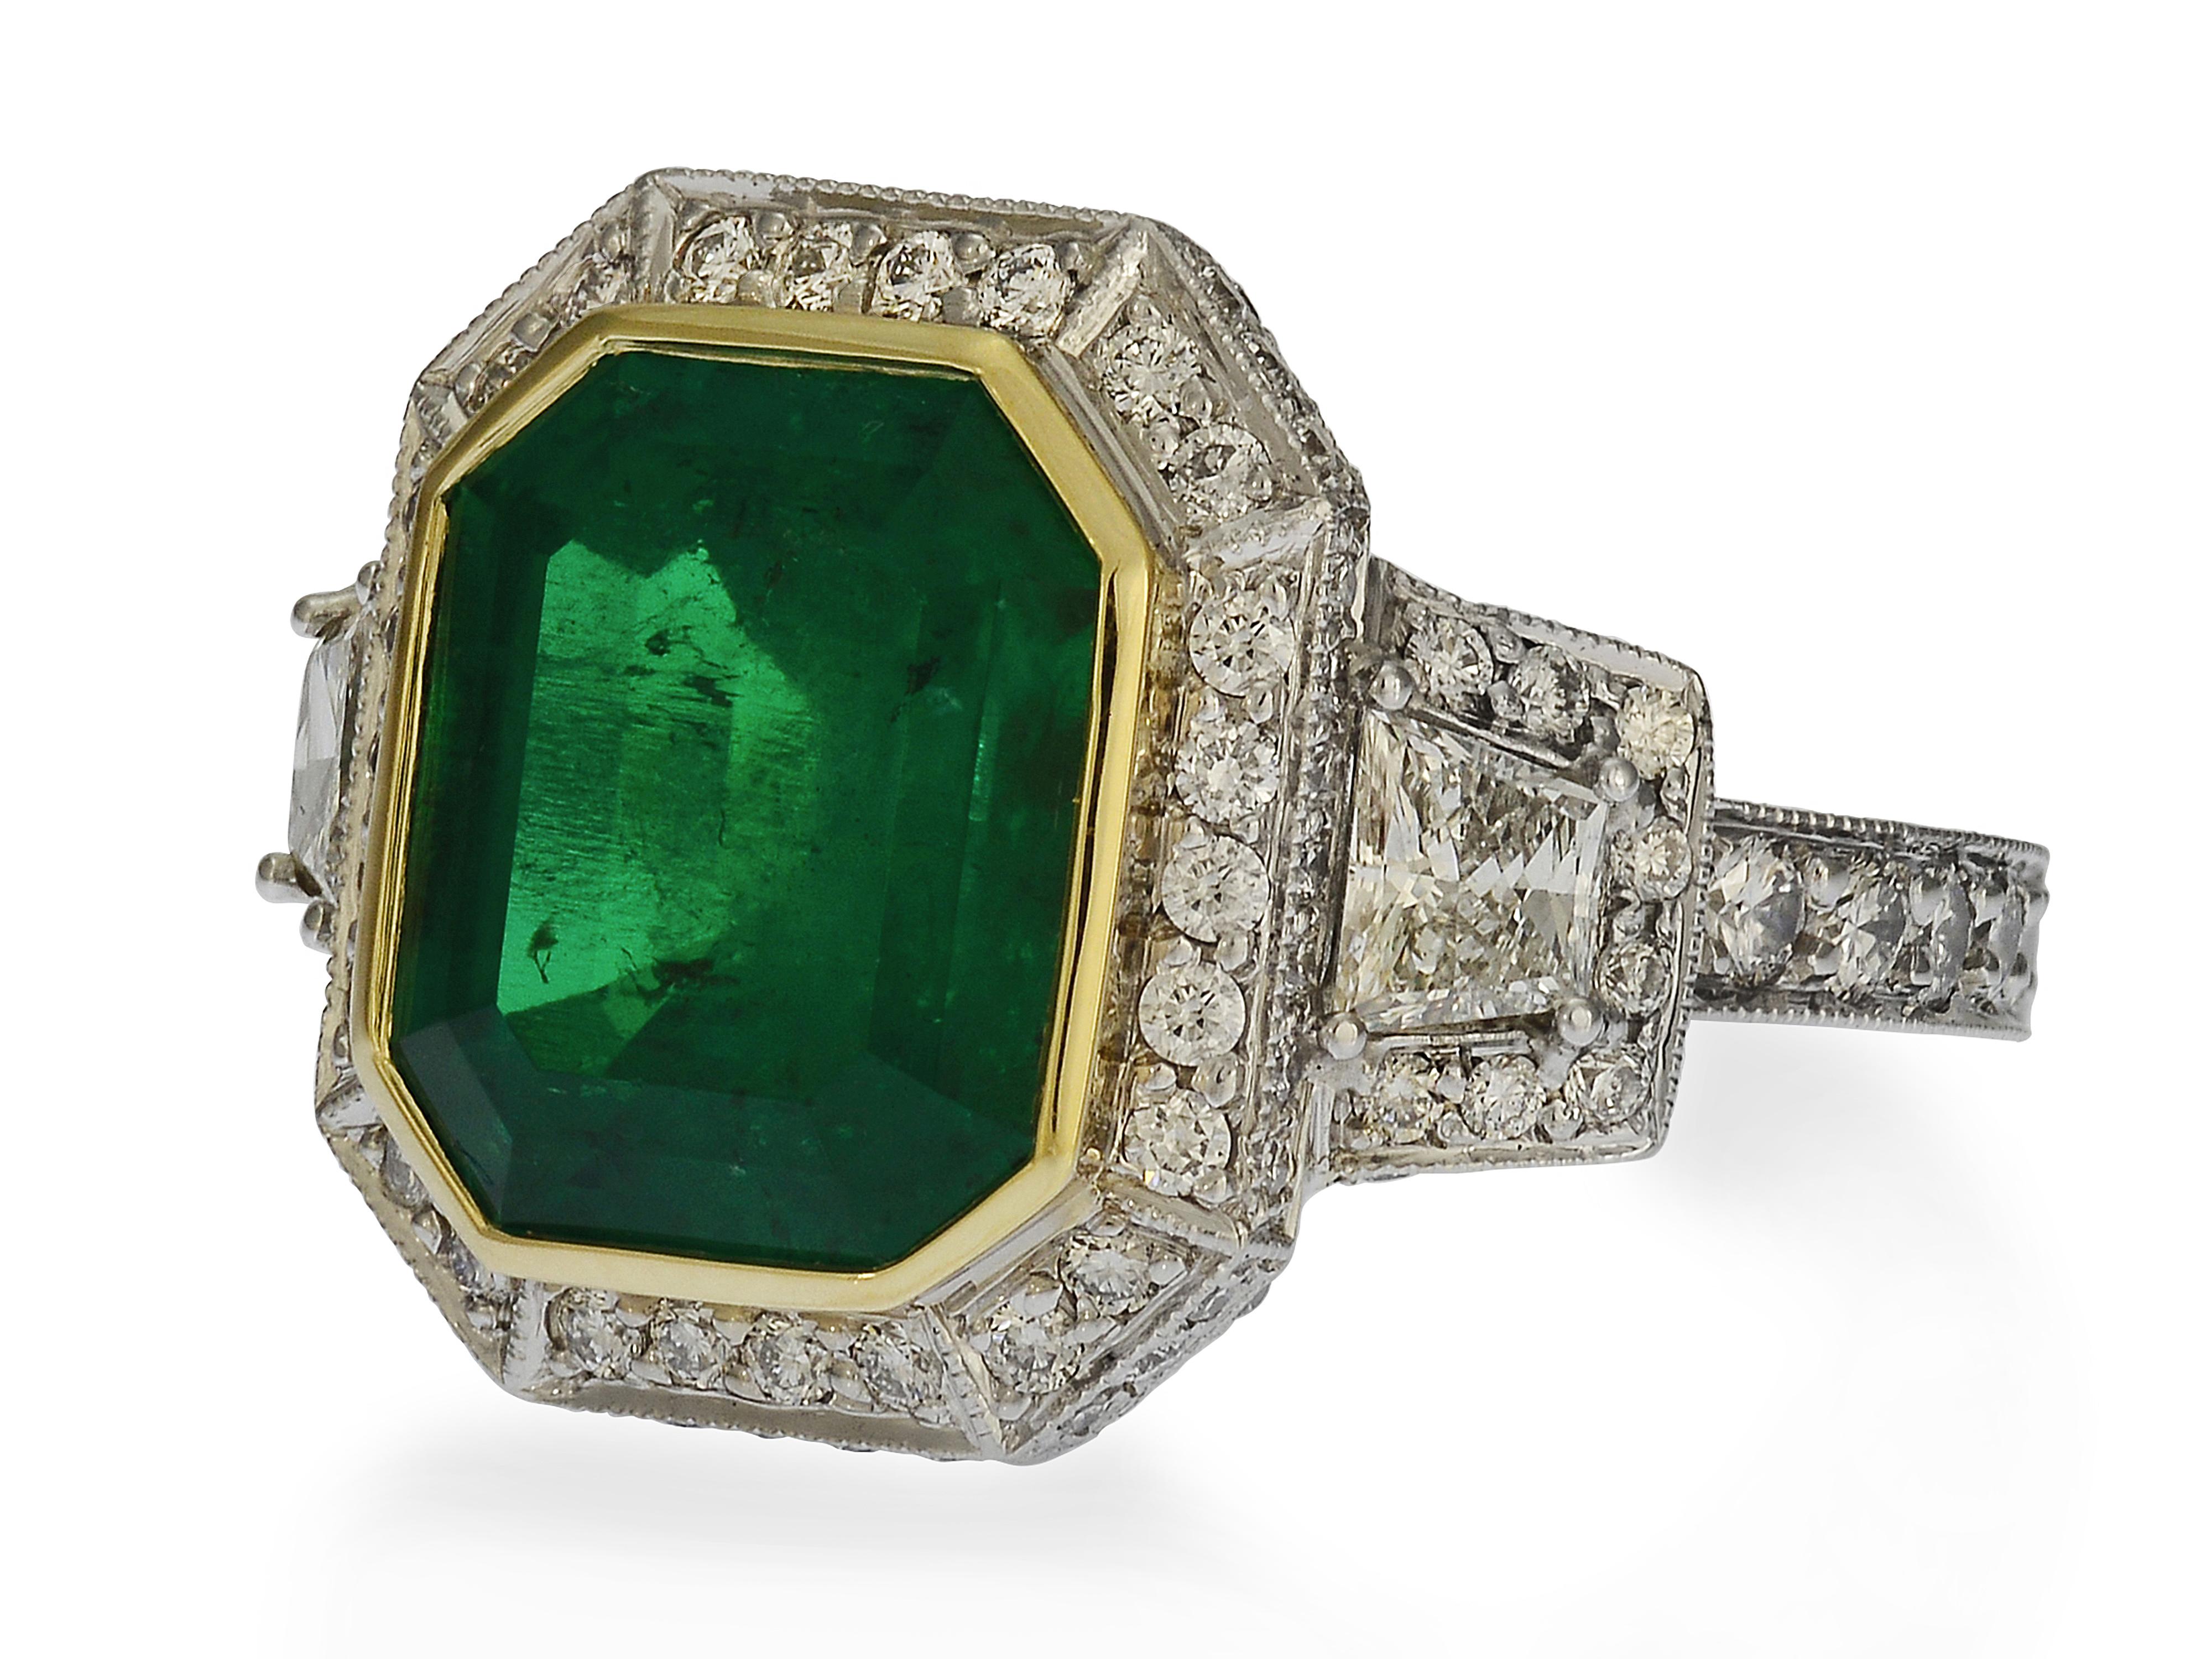 This one-of-a-kind Colombian emerald cocktail ring is custom made in 18 karat white gold with an 18 karat yellow gold bezel. The centerpiece is an emerald cut Colombian emerald, graded by GIA as natural & transparent, with minimal (F1) treatment.